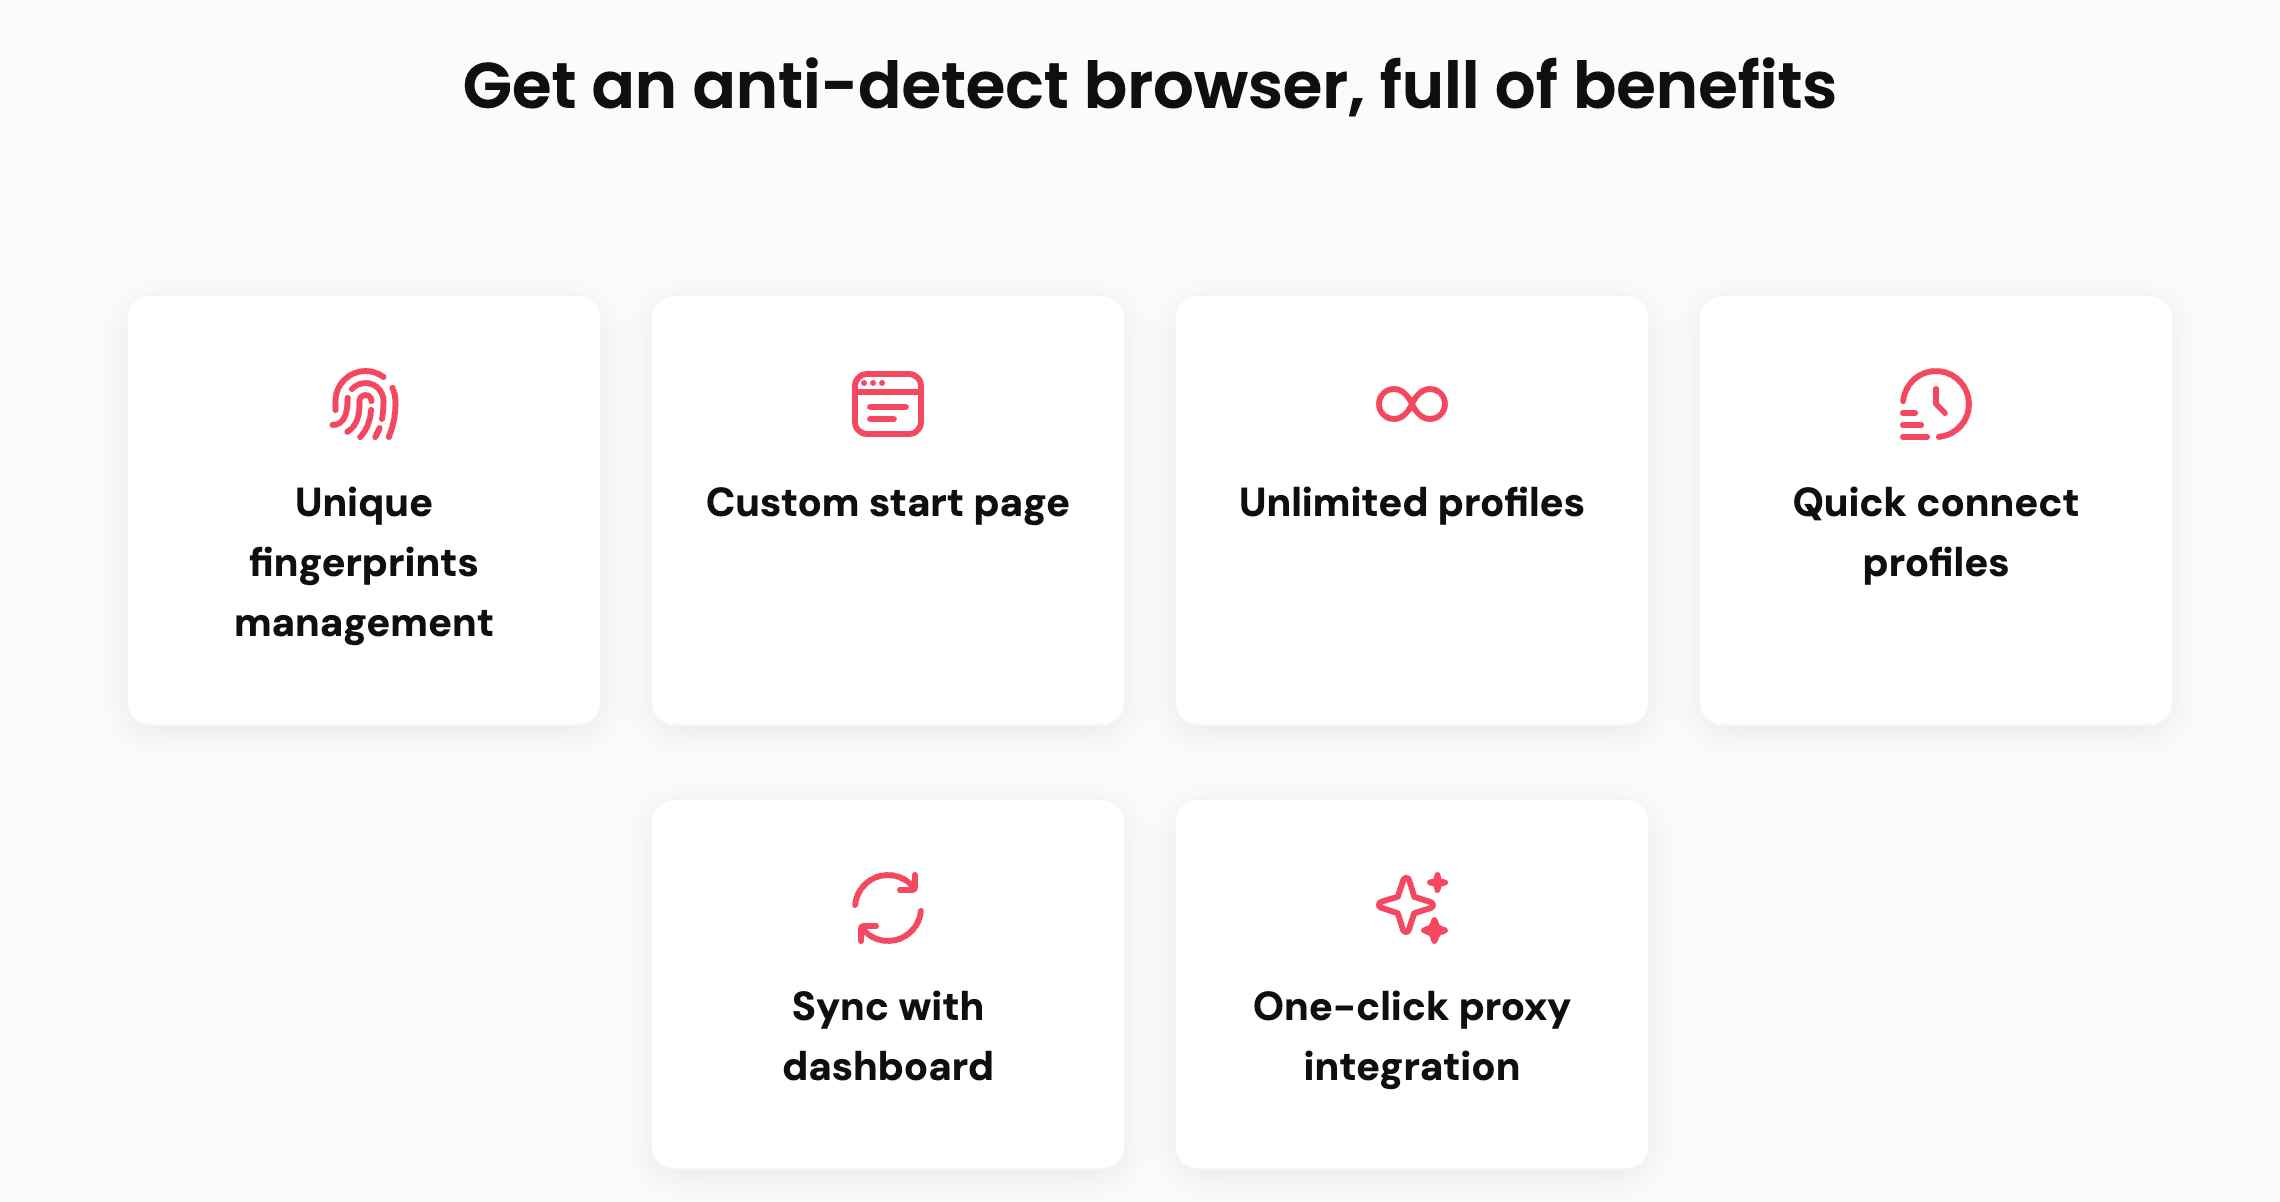 Benefits With X Browser